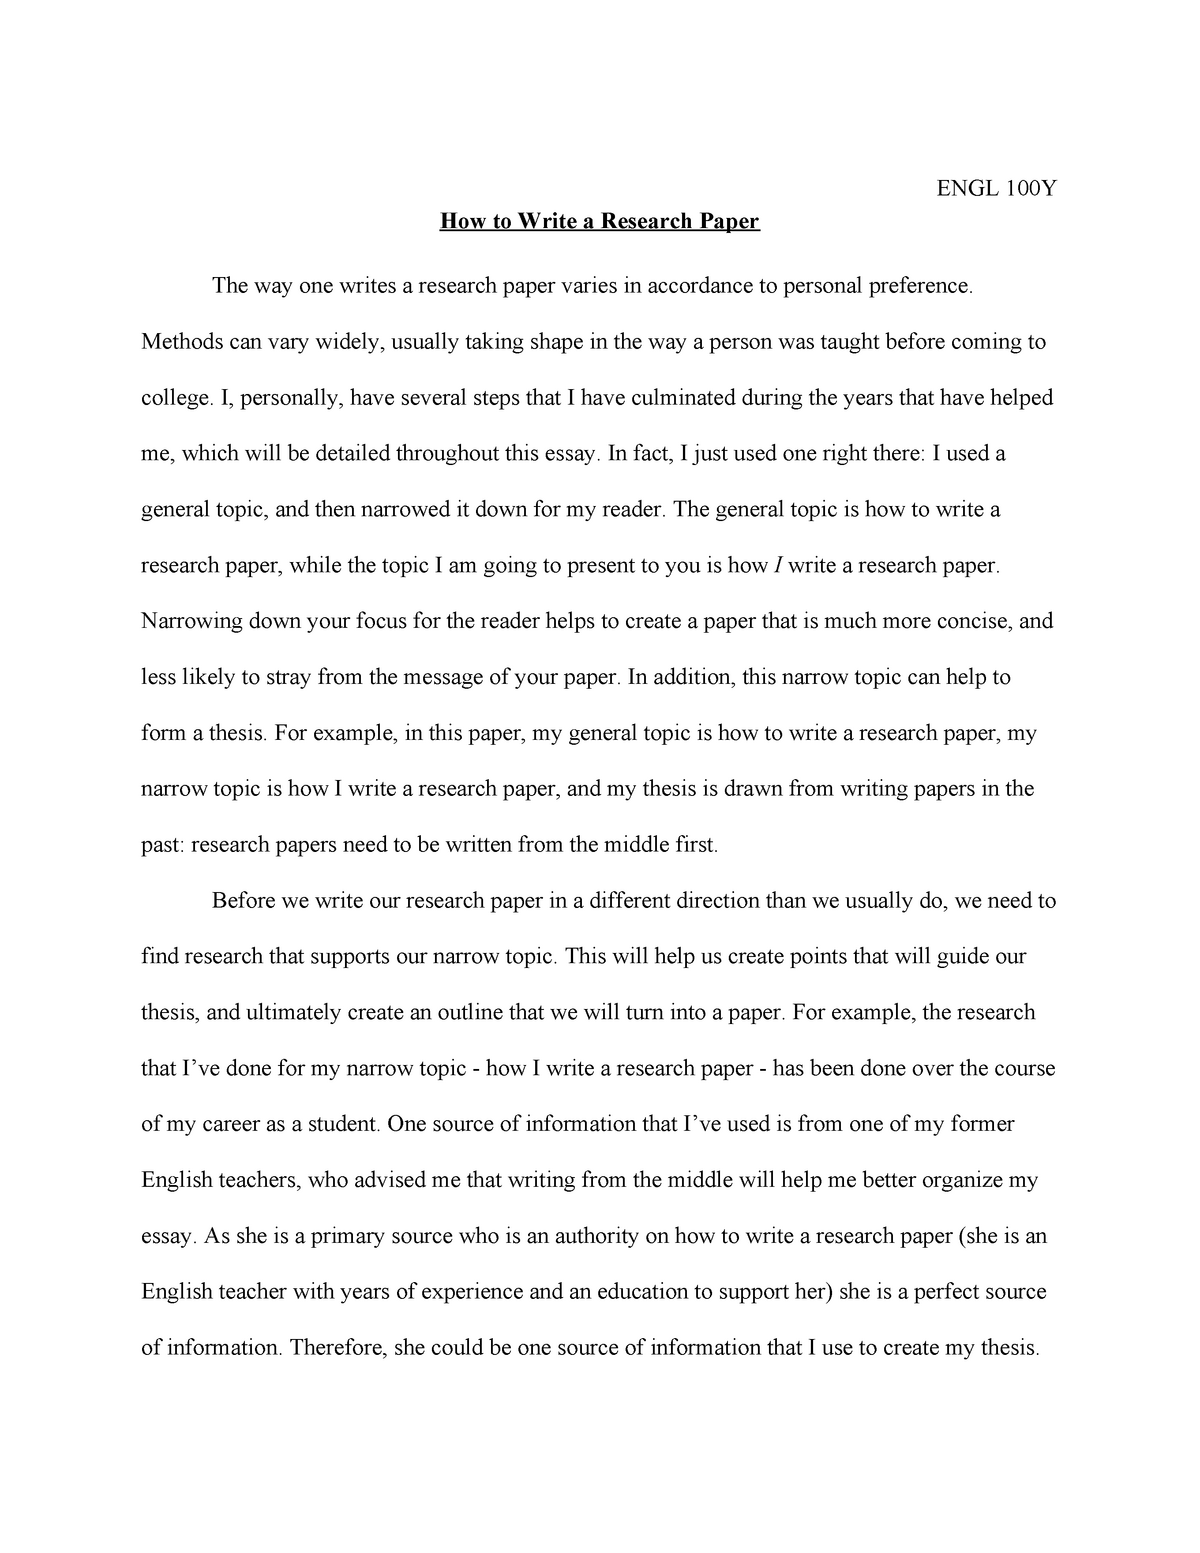 How to Write a Research Paper (Final Draft) - ENGL 27Y